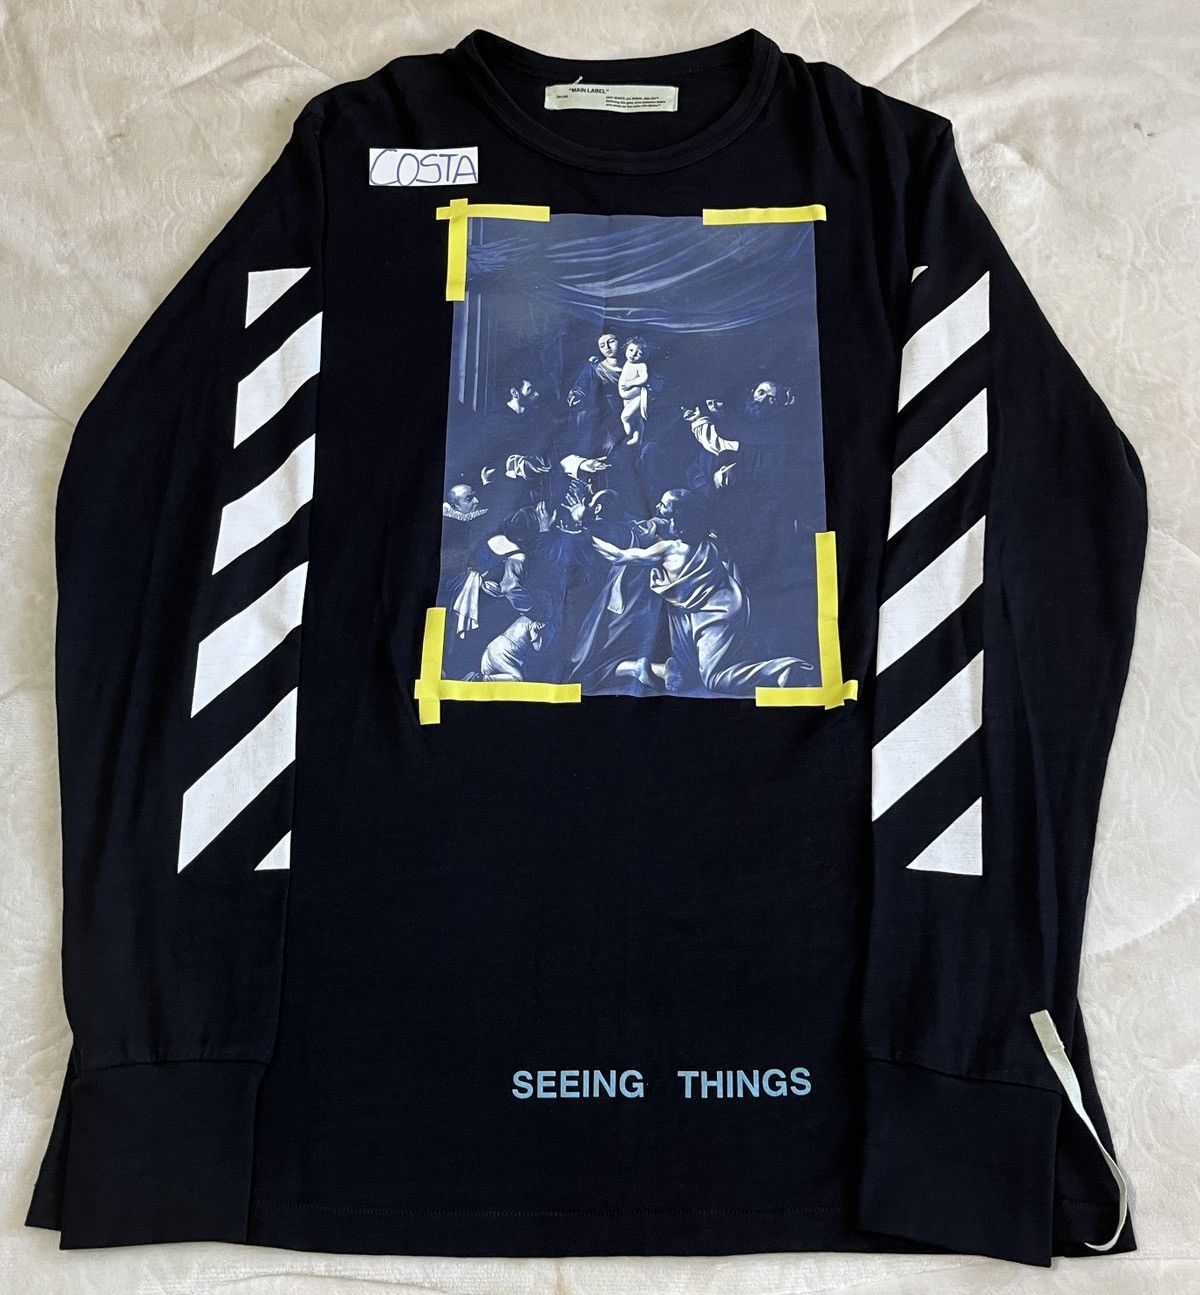 Off-White Off White Caravaggio Seeing Things 2013 Longsleeve | Grailed